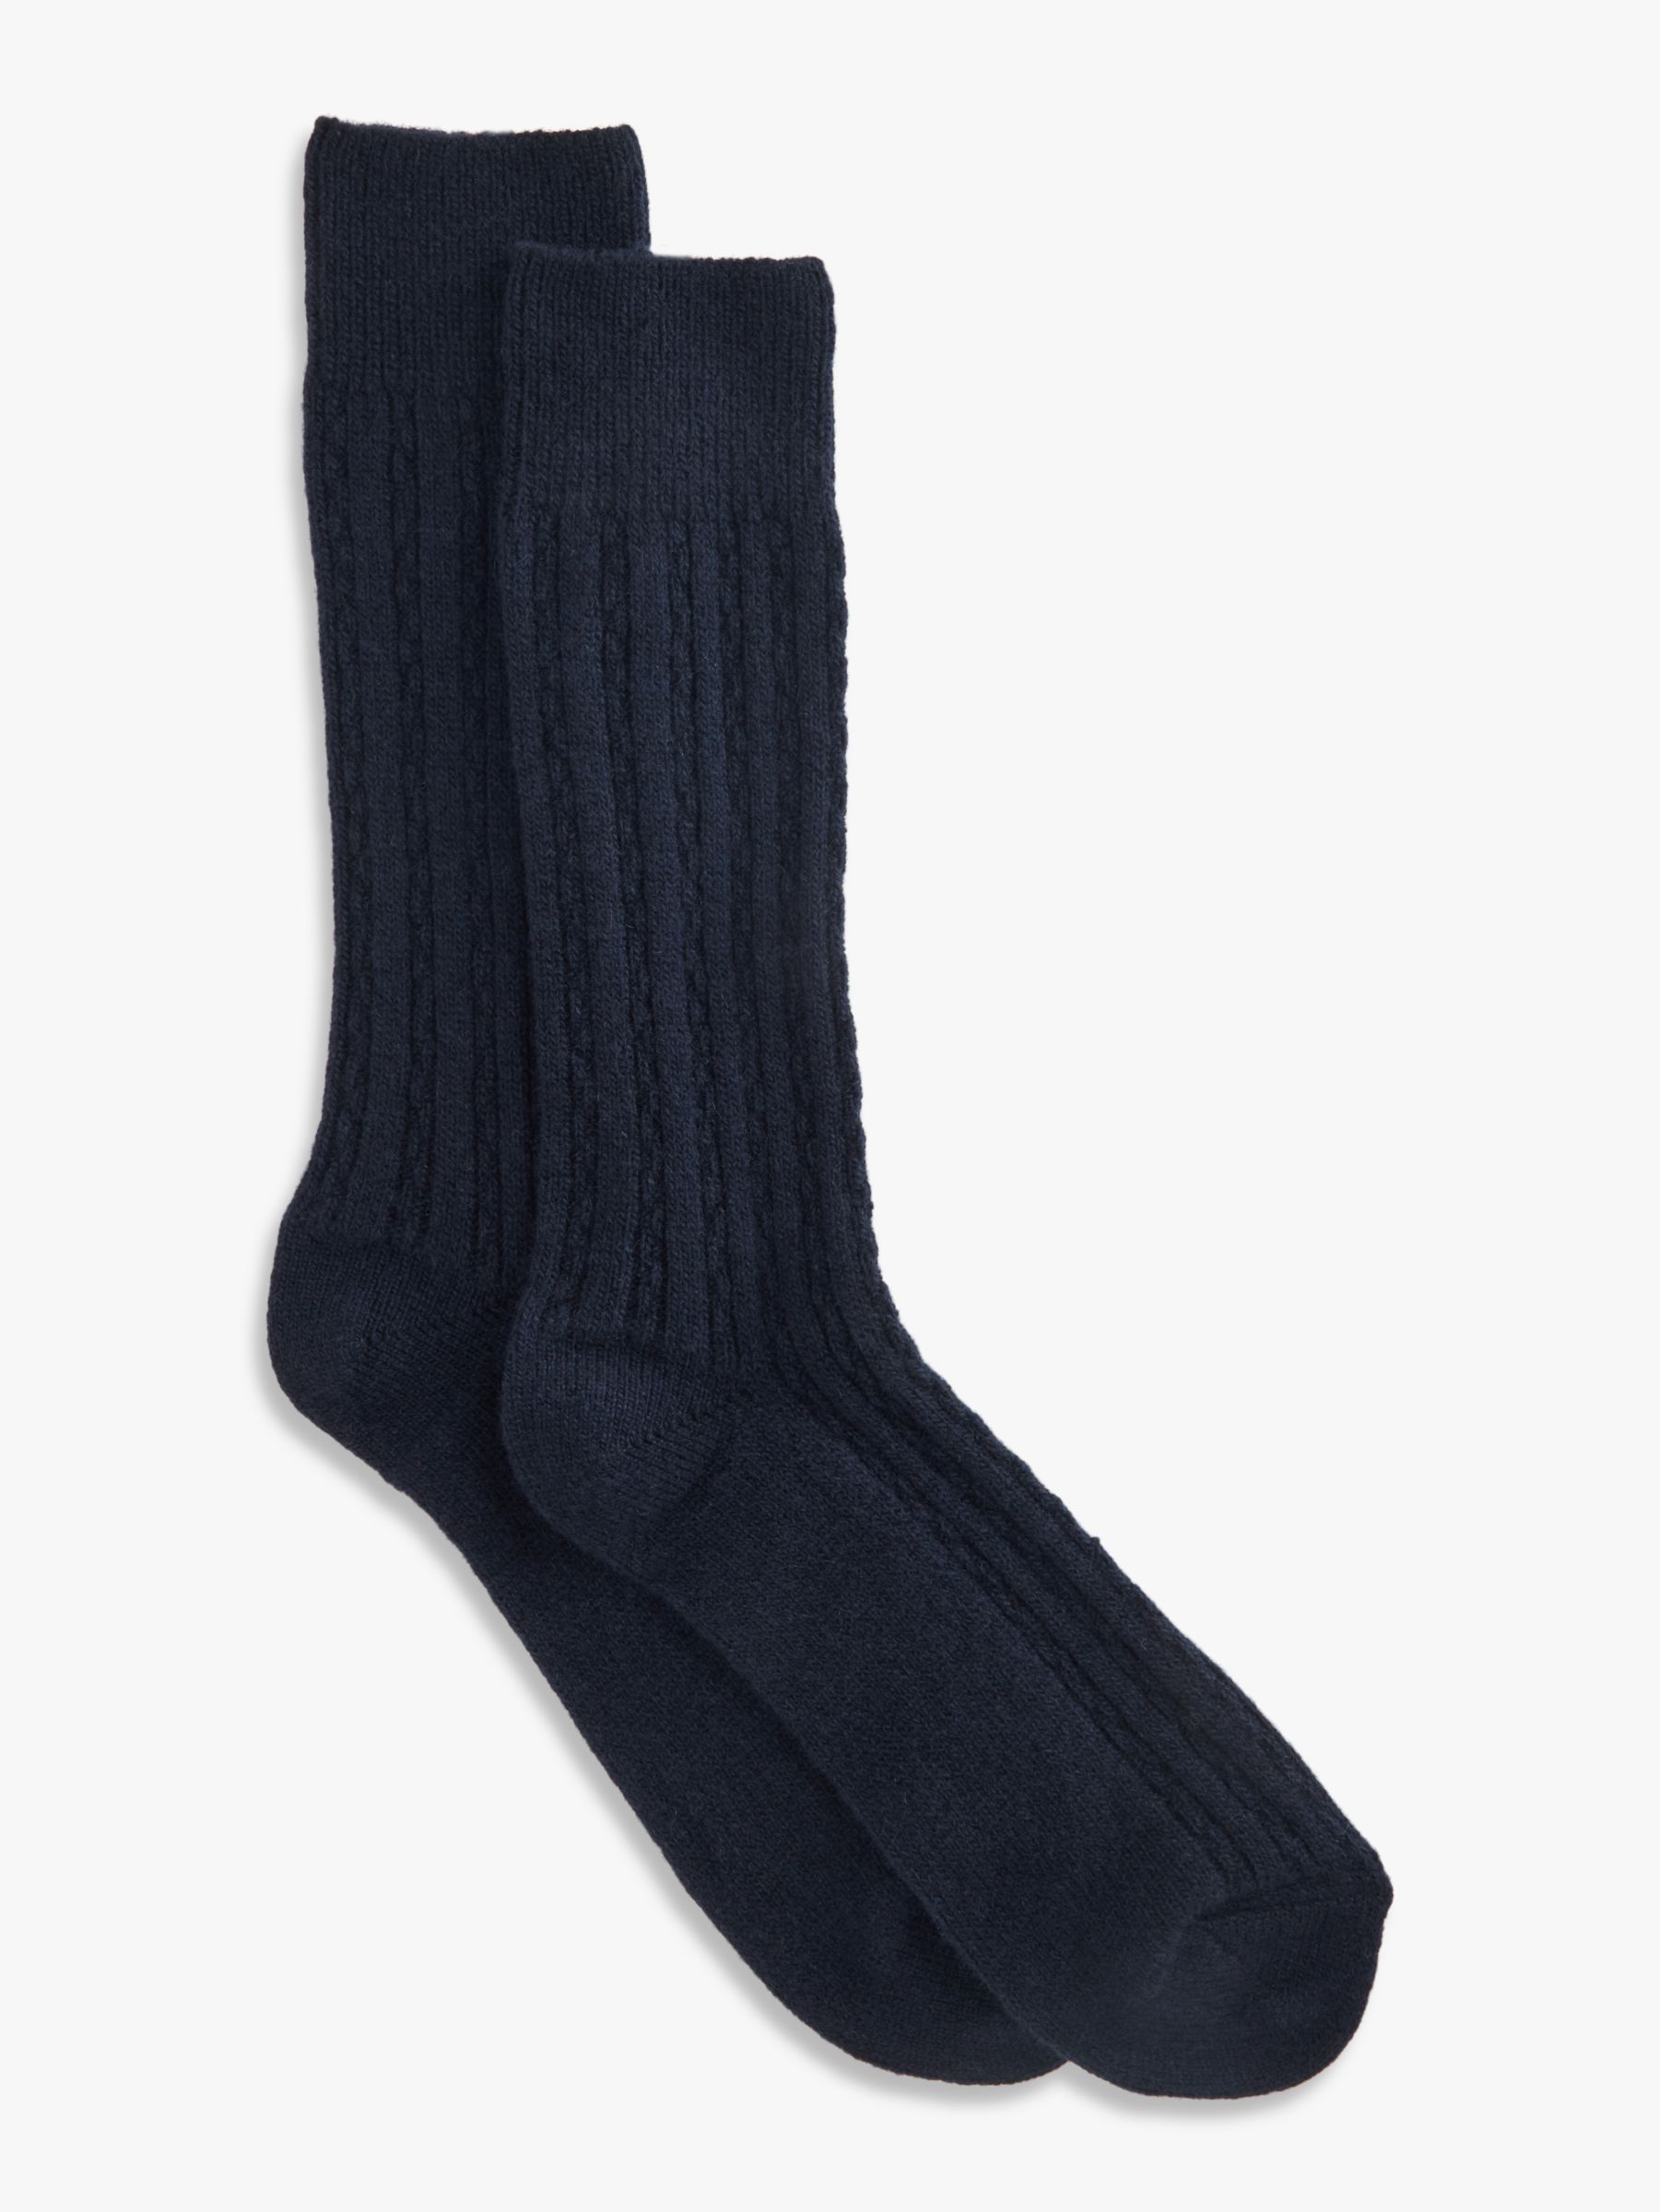 John Lewis Made in Italy Ribbed Cashmere Blend Socks, Navy